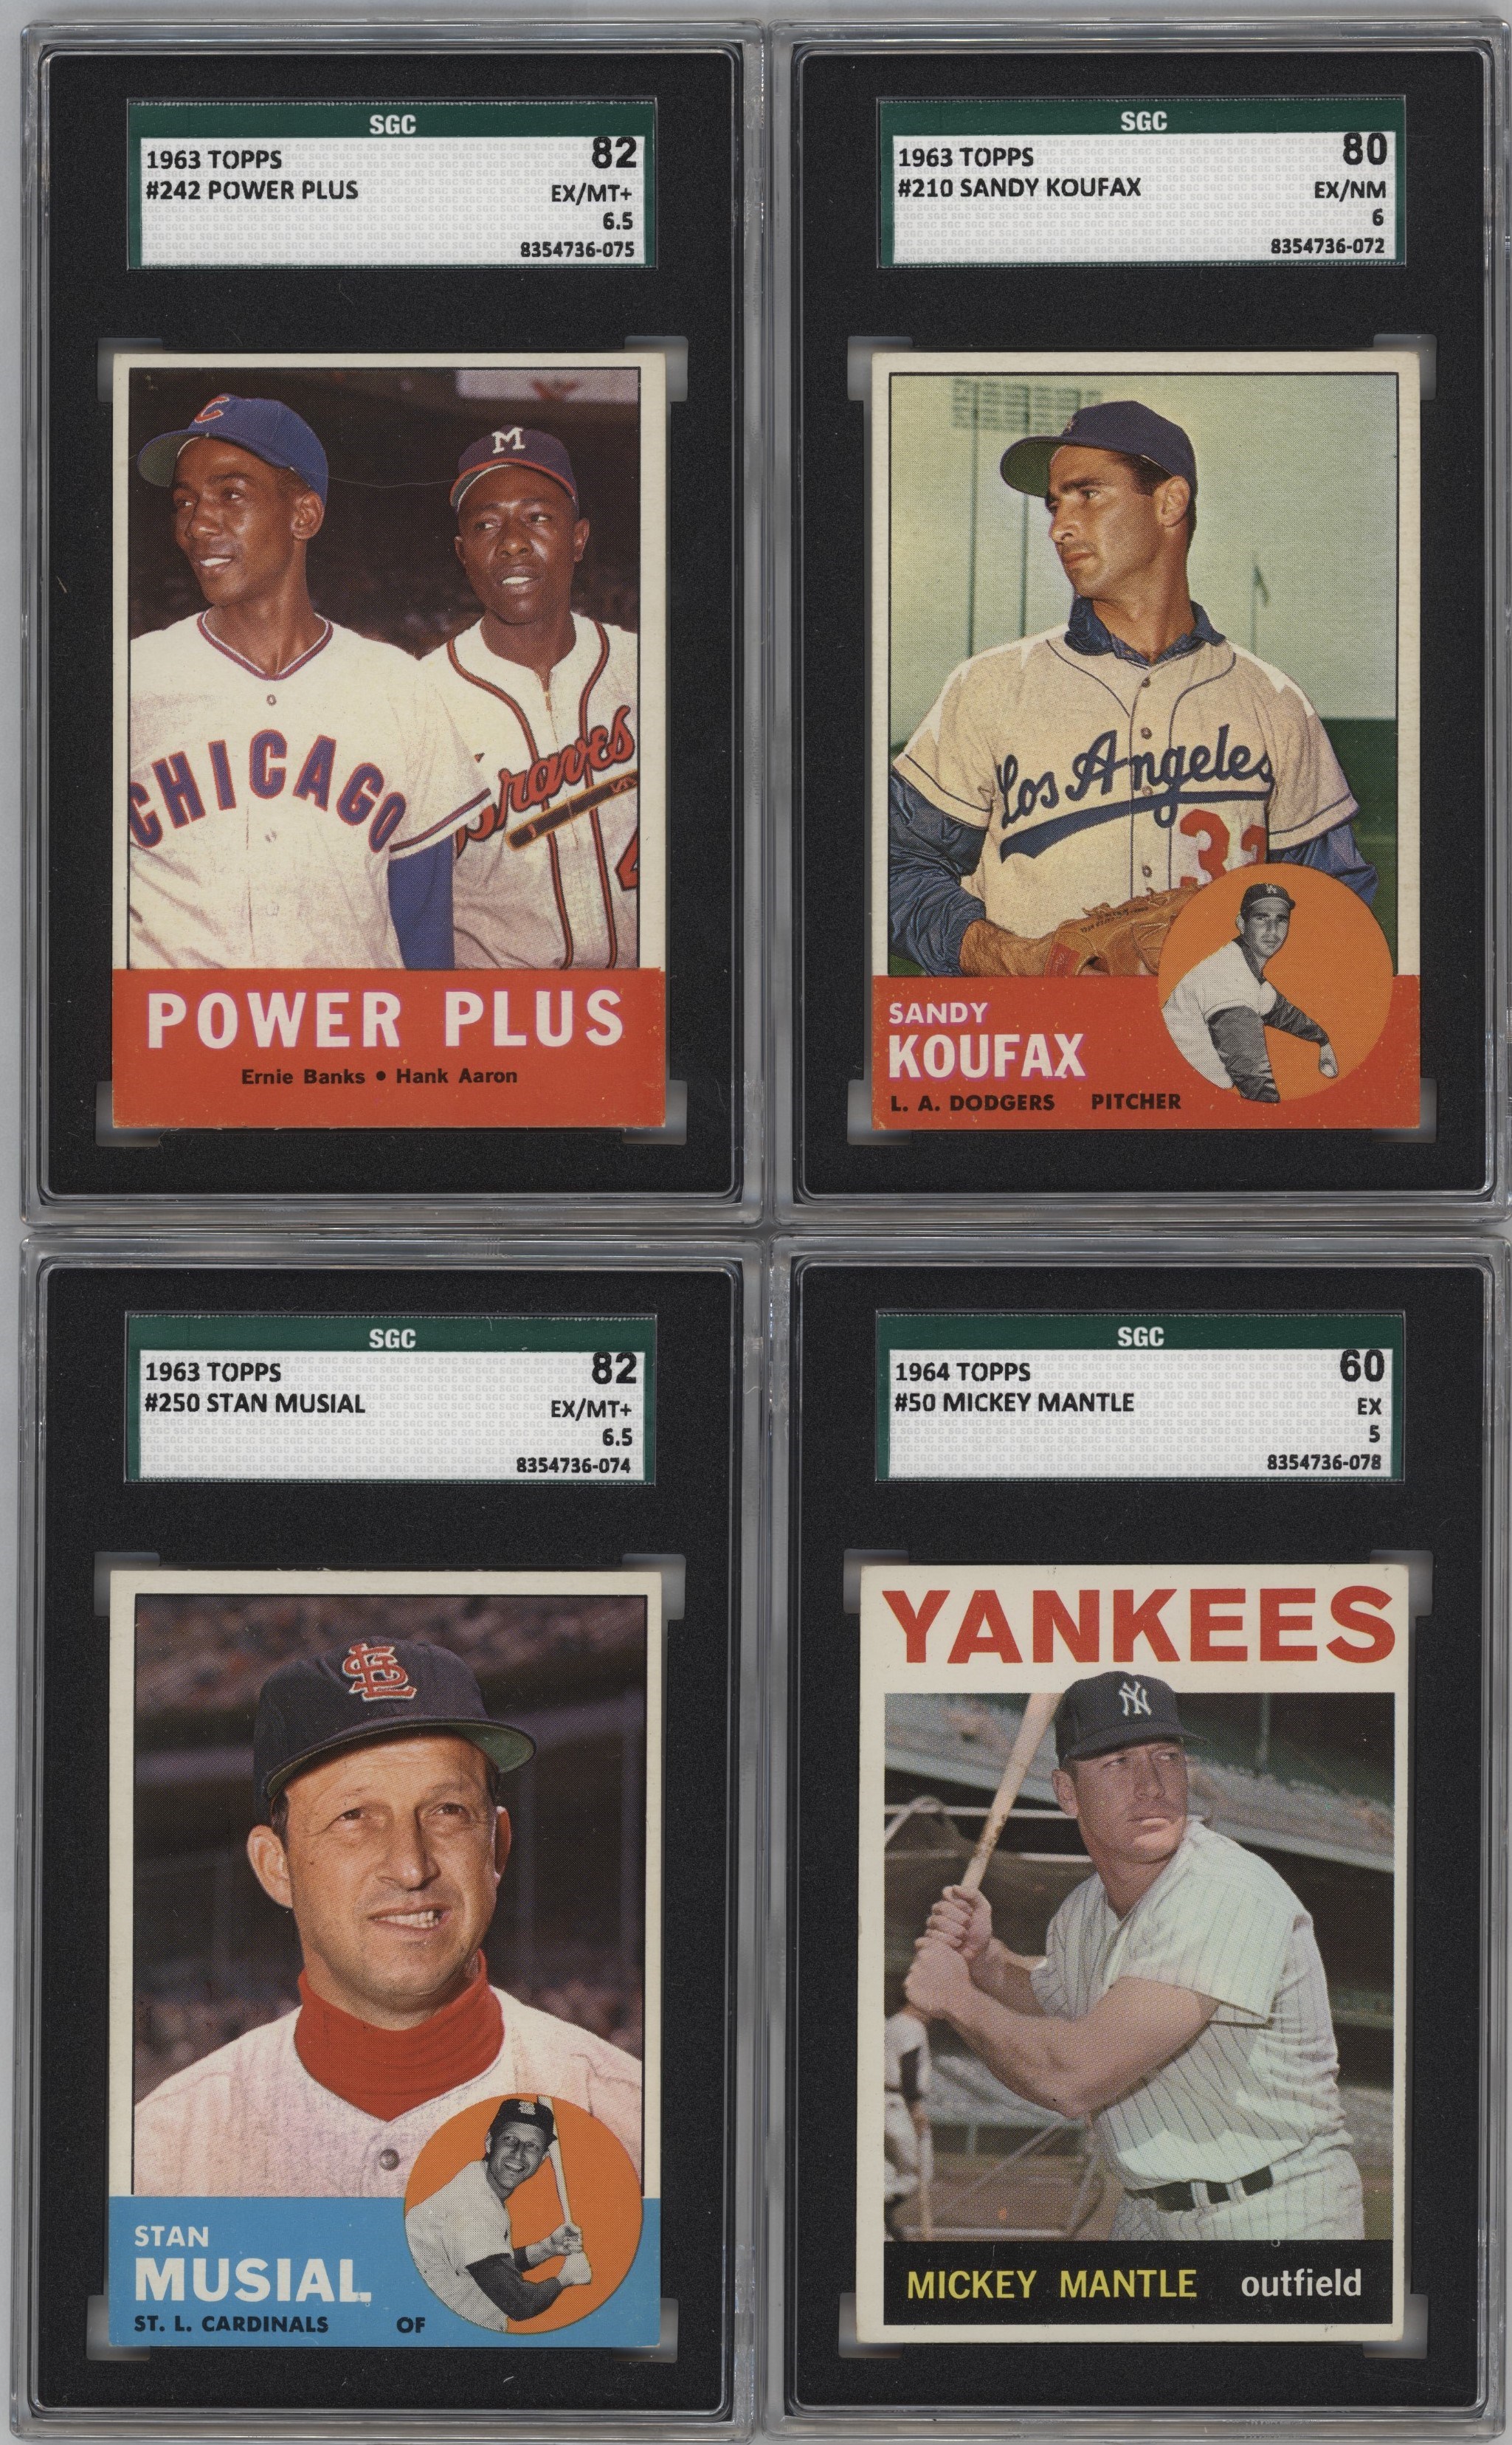 Baseball and Trading Cards - 1963 and 1964 Topps Baseball Partial Sets w/(11) SGC Graded - Mantle, Koufax, Mays, Aaron (800+ Cards)